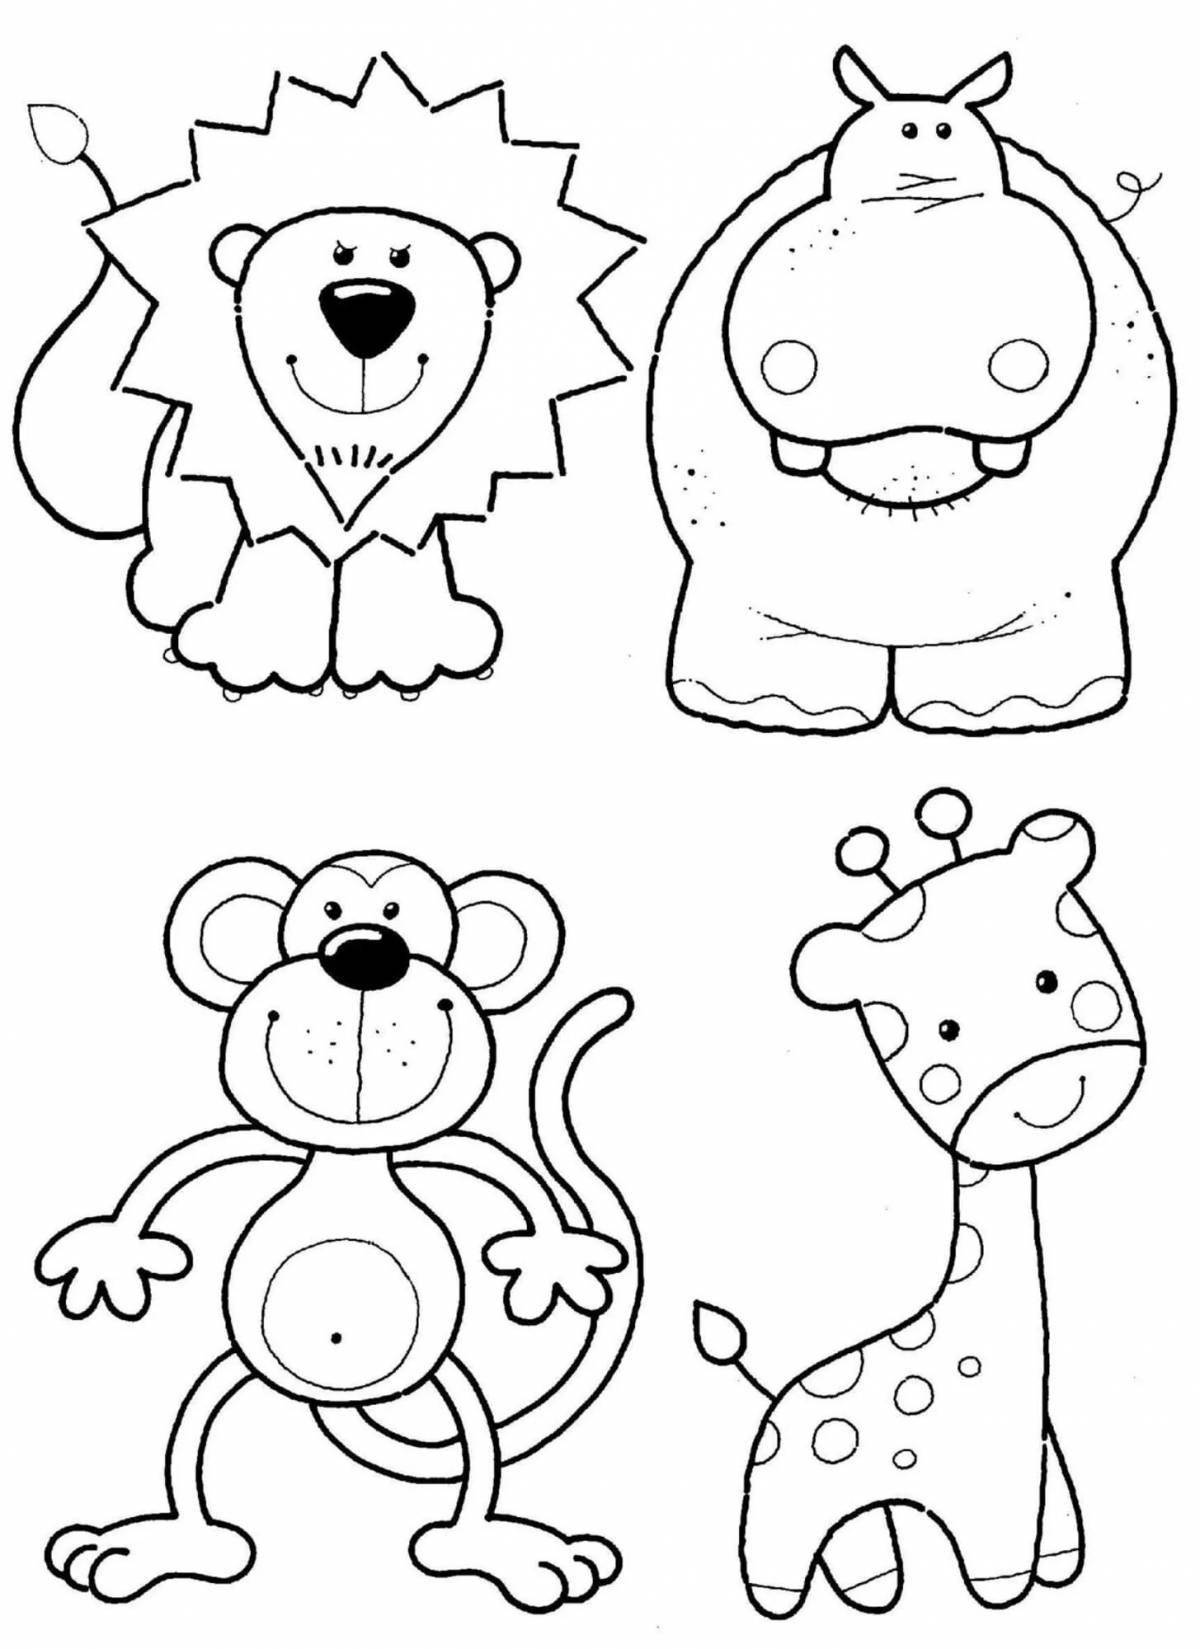 Amazing animal coloring pages for kids 3 4